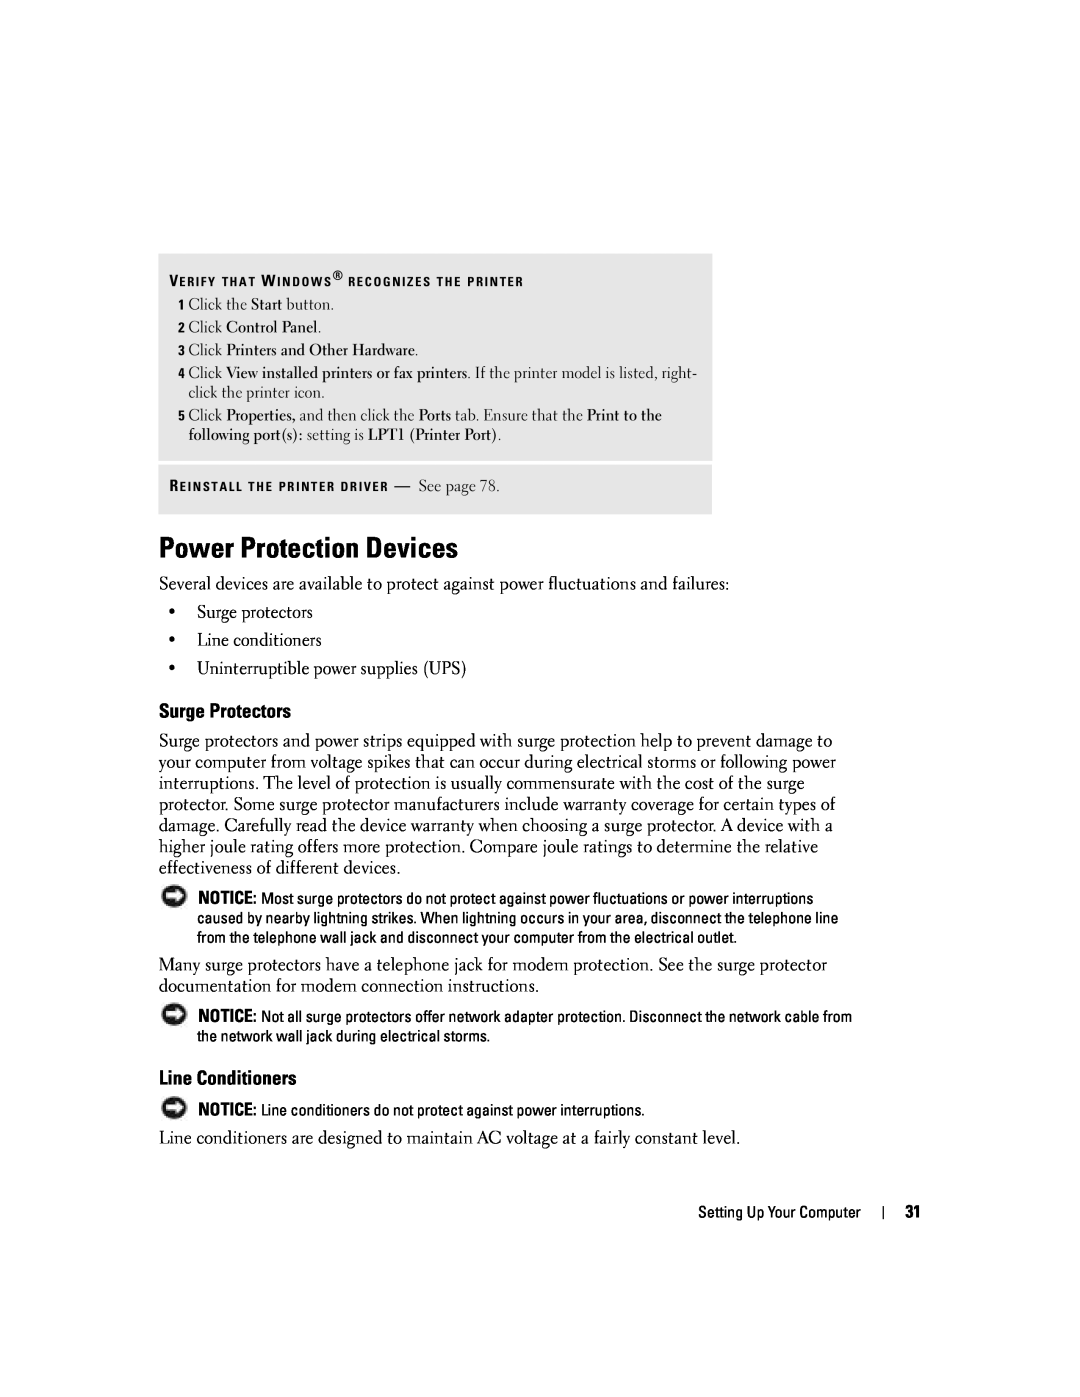 Dell PP10L owner manual Power Protection Devices, Surge Protectors, Line Conditioners 